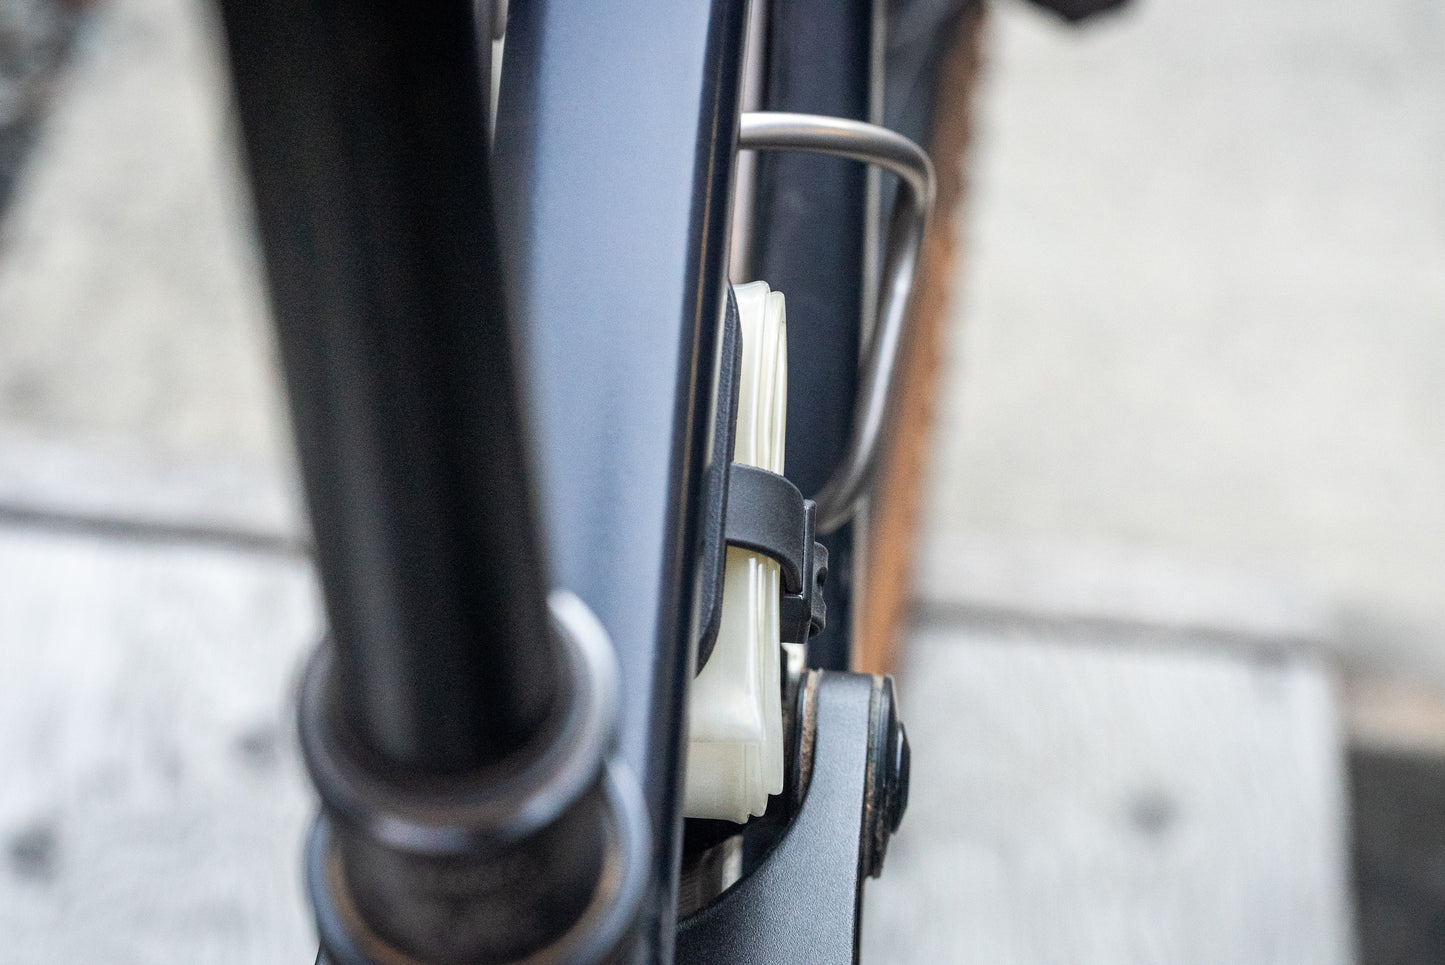 Image: The Standby Tube Strap Bracket, a clever bike accessory that conceals an Apple AirTag within a discreet bracket used to carry a spare tube on your bike. This lightweight and durable bracket is designed to blend in seamlessly and does not resemble a typical AirTag holder. It is specifically designed for use with Aerothan and Tubolito tubes and comes complete with a Voile Nano strap for easy installation. Made in Canada. top down.